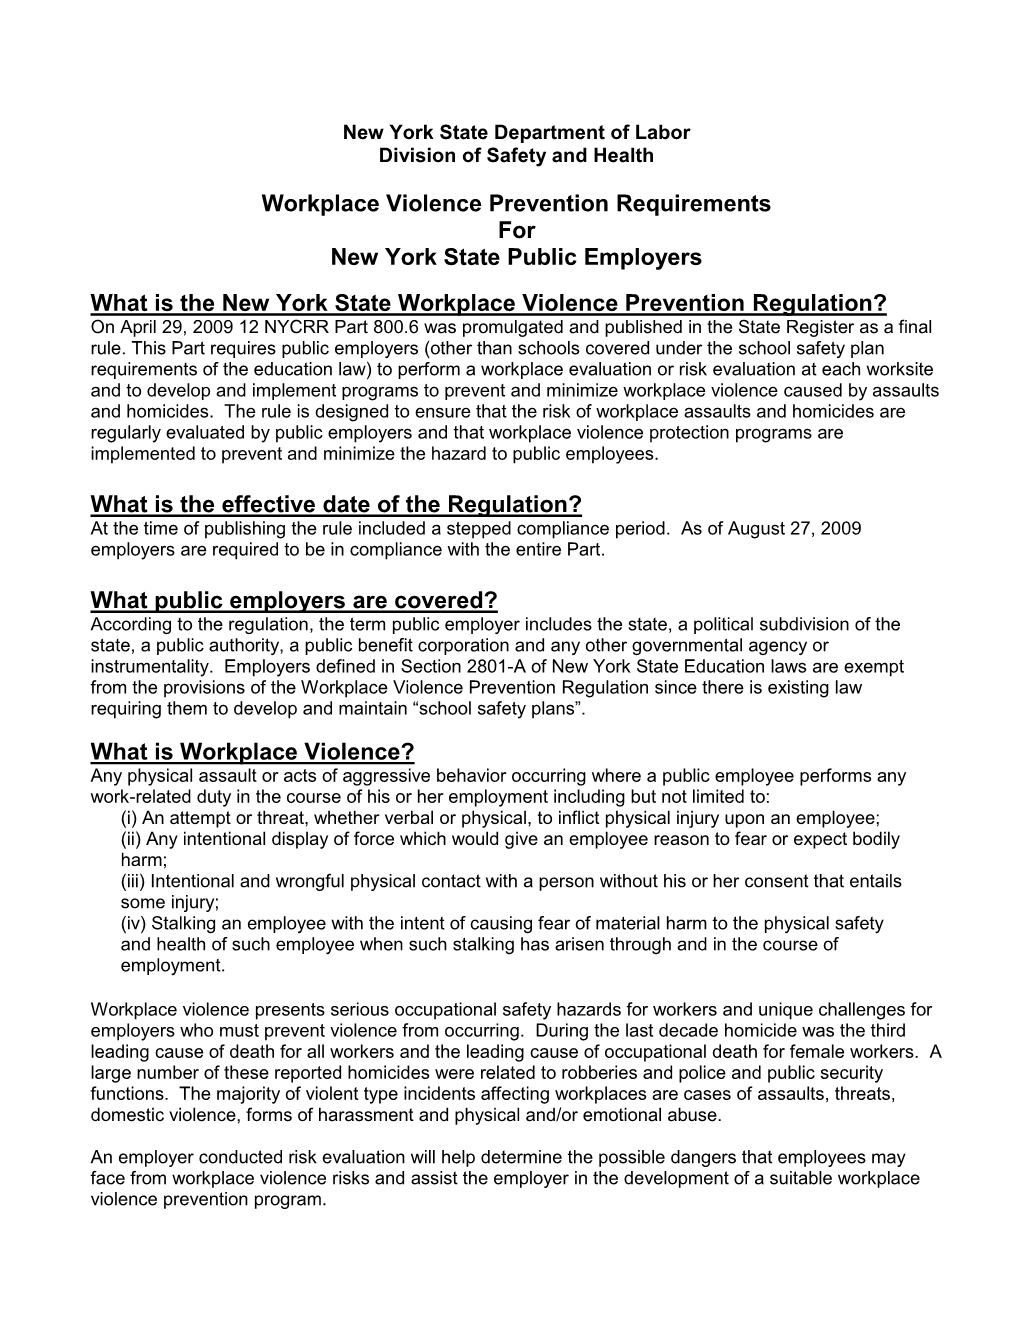 Workplace Violence Prevention Requirements for New York State Public Employers